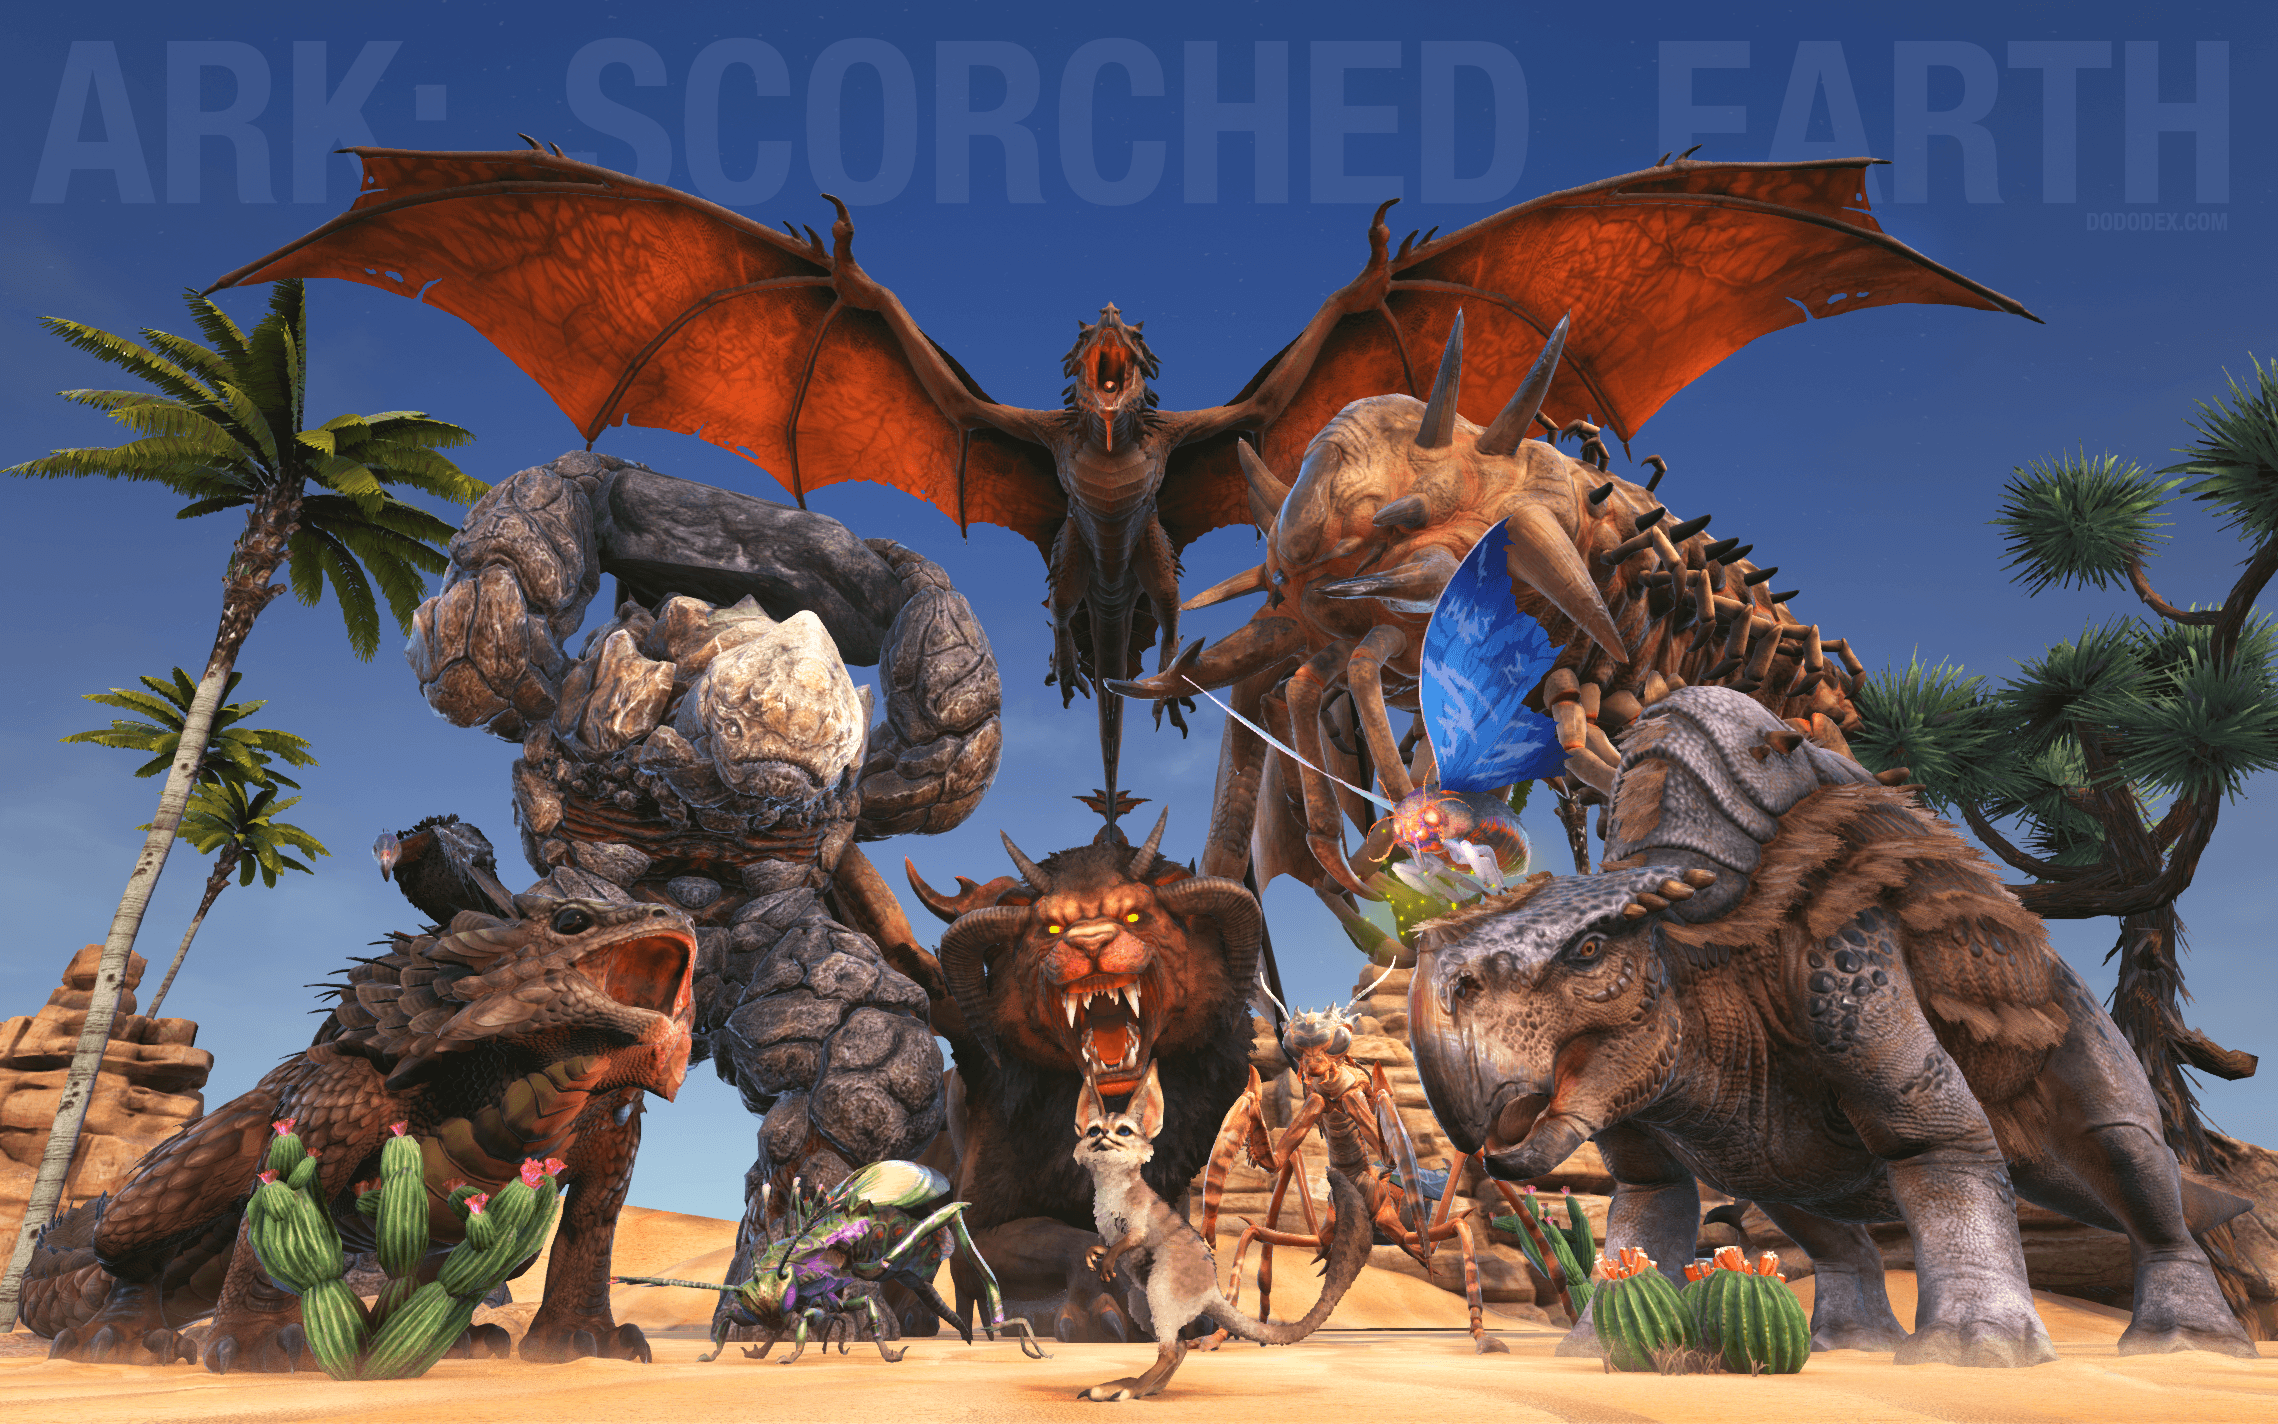 Ark Survival Evolved Scorched Earth Wallpaper Full HD Download